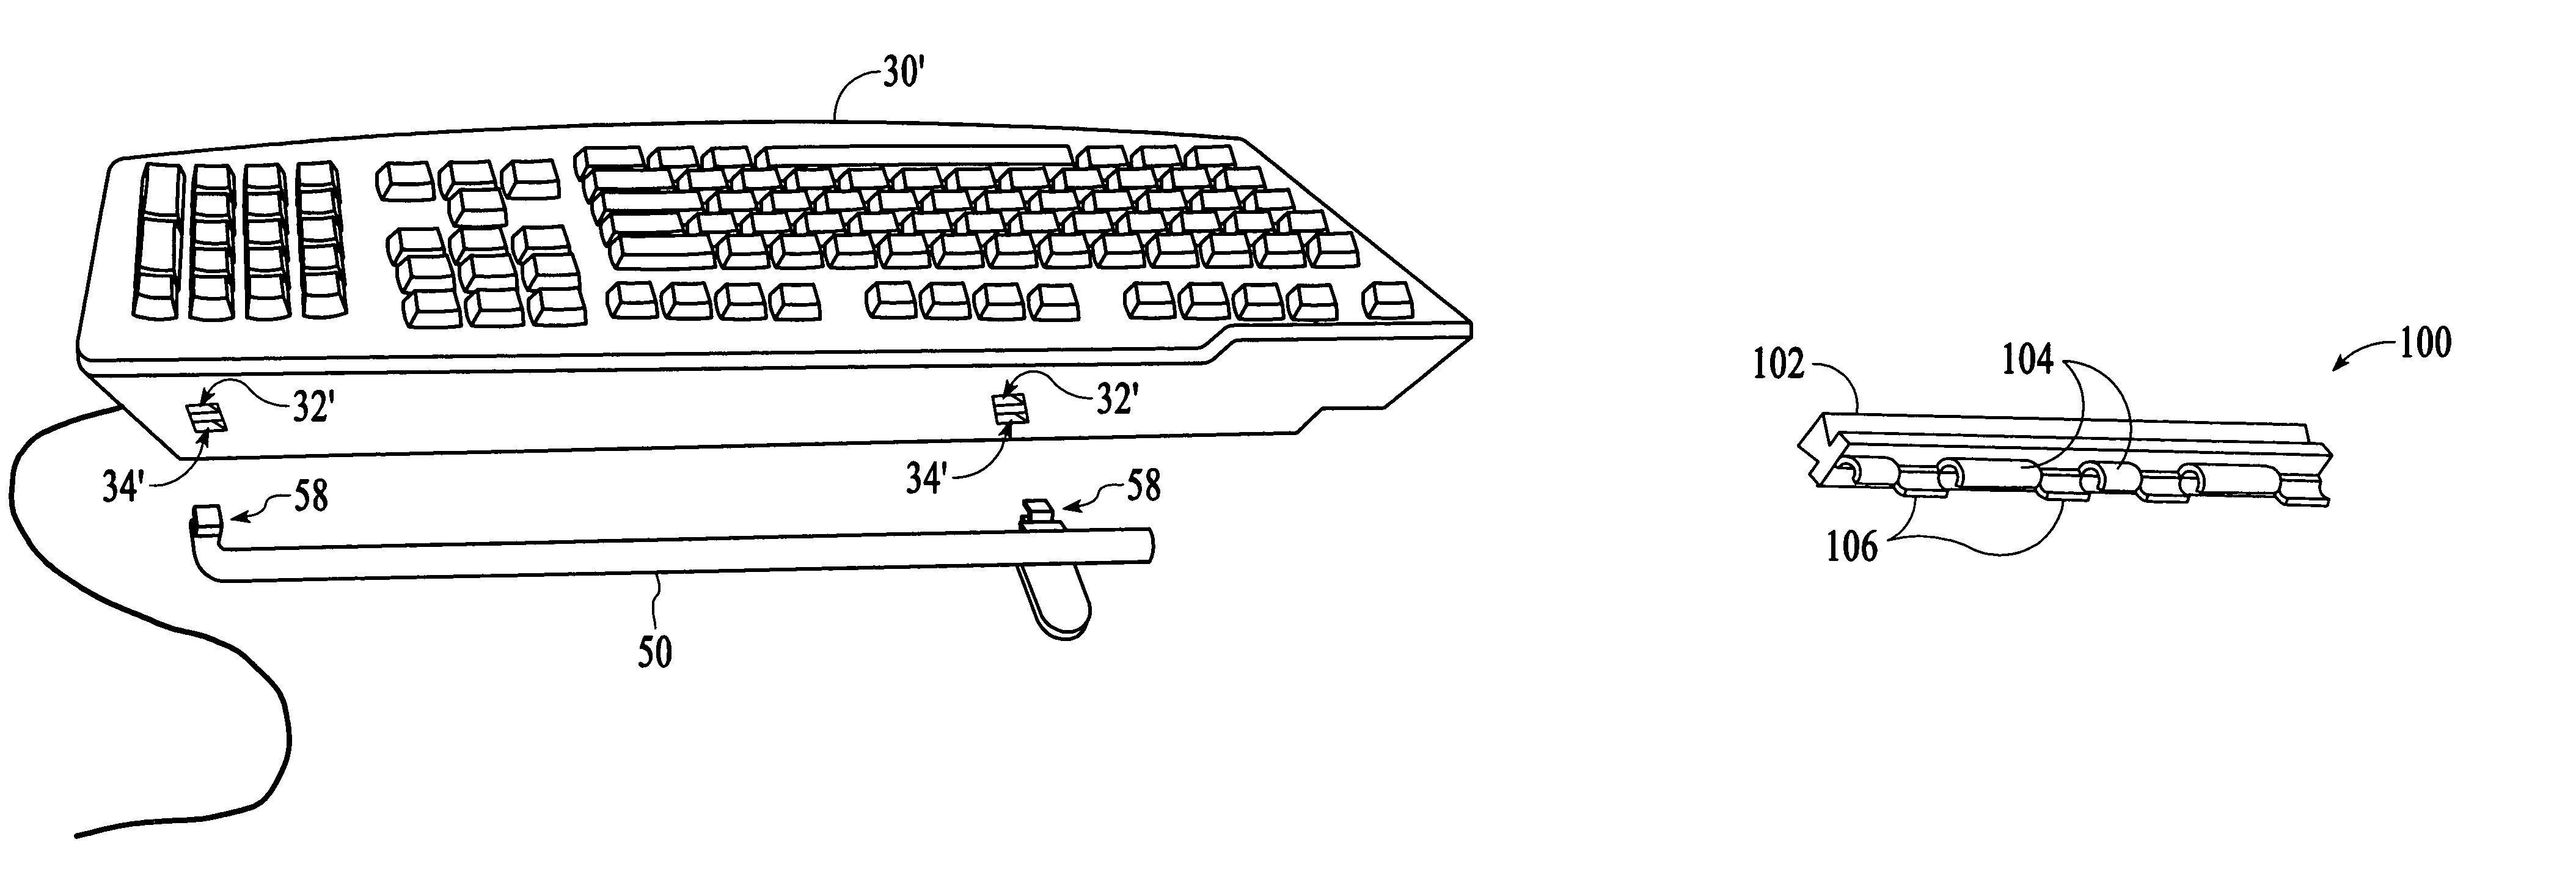 System for organizing one or more personal computer accessory devices